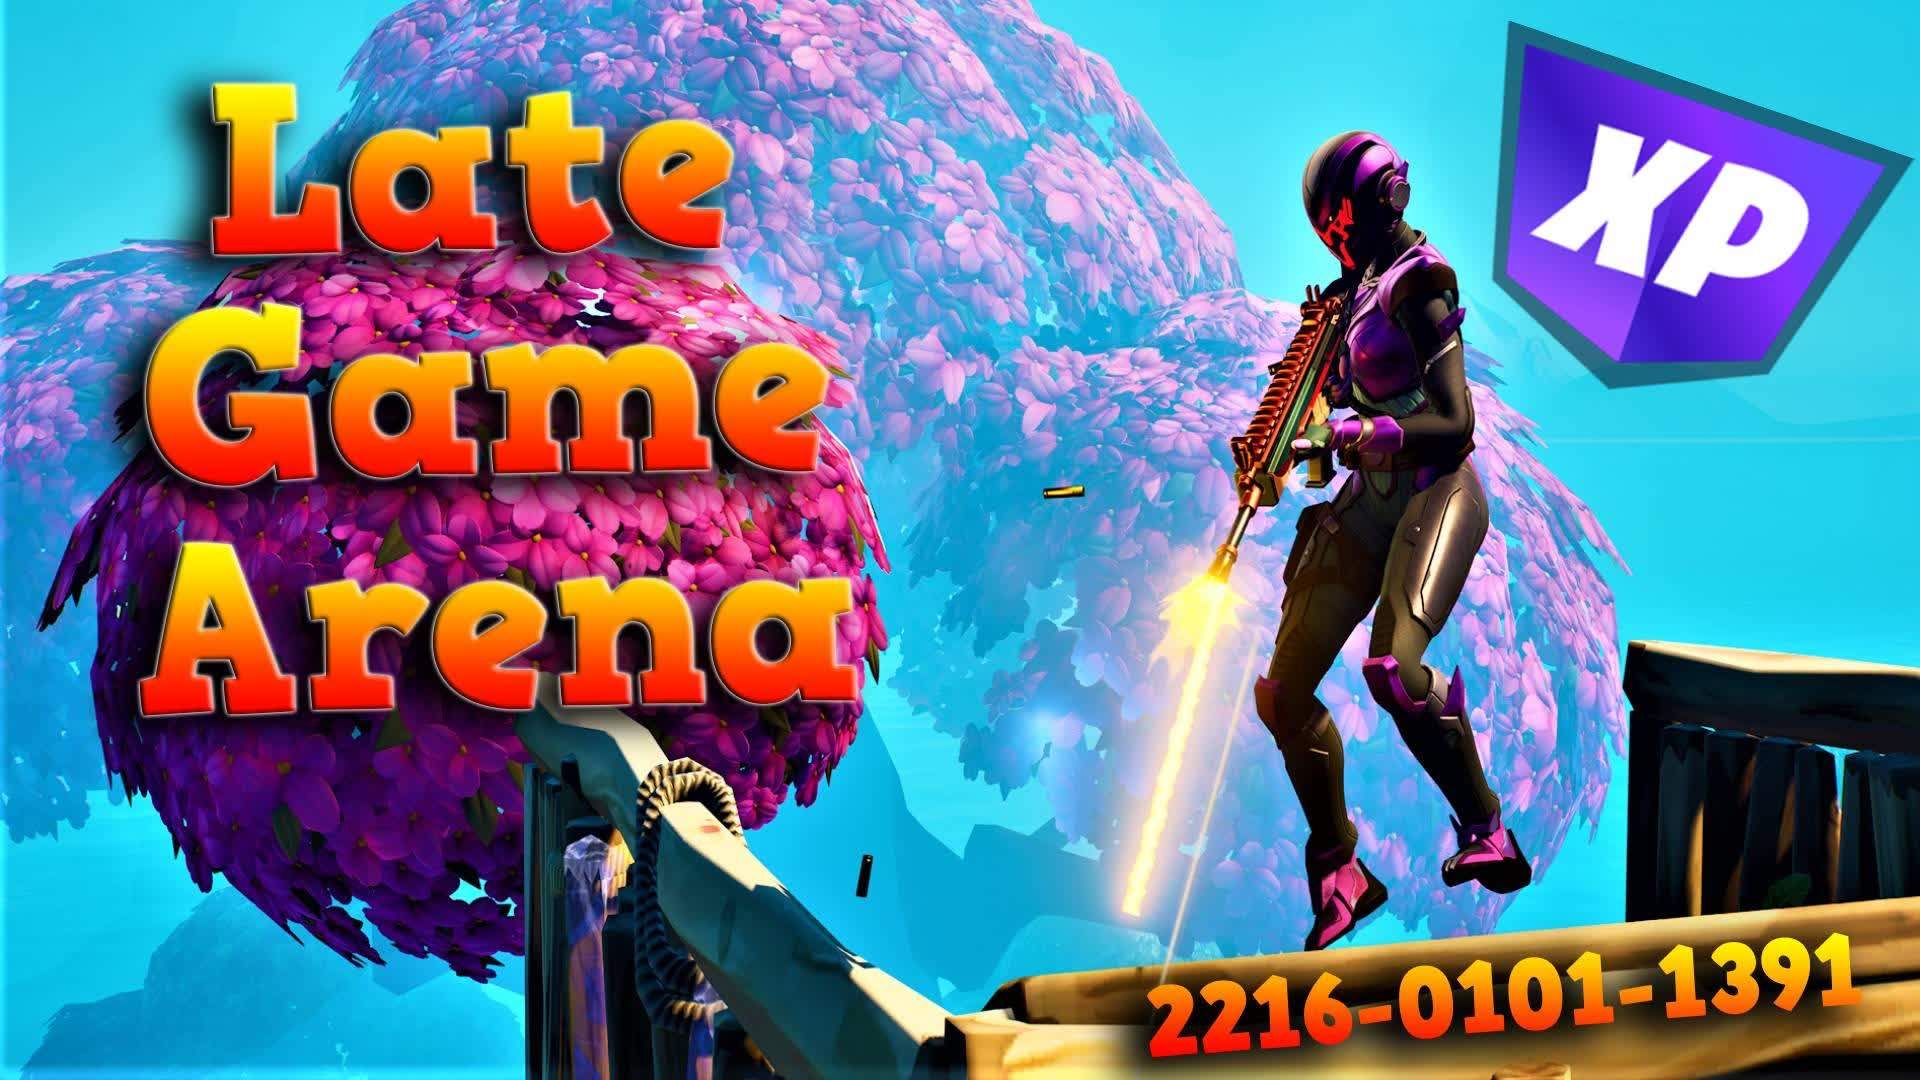 PIRATES OPEN WORLD 4495-3830-1825 by universal-code - Fortnite